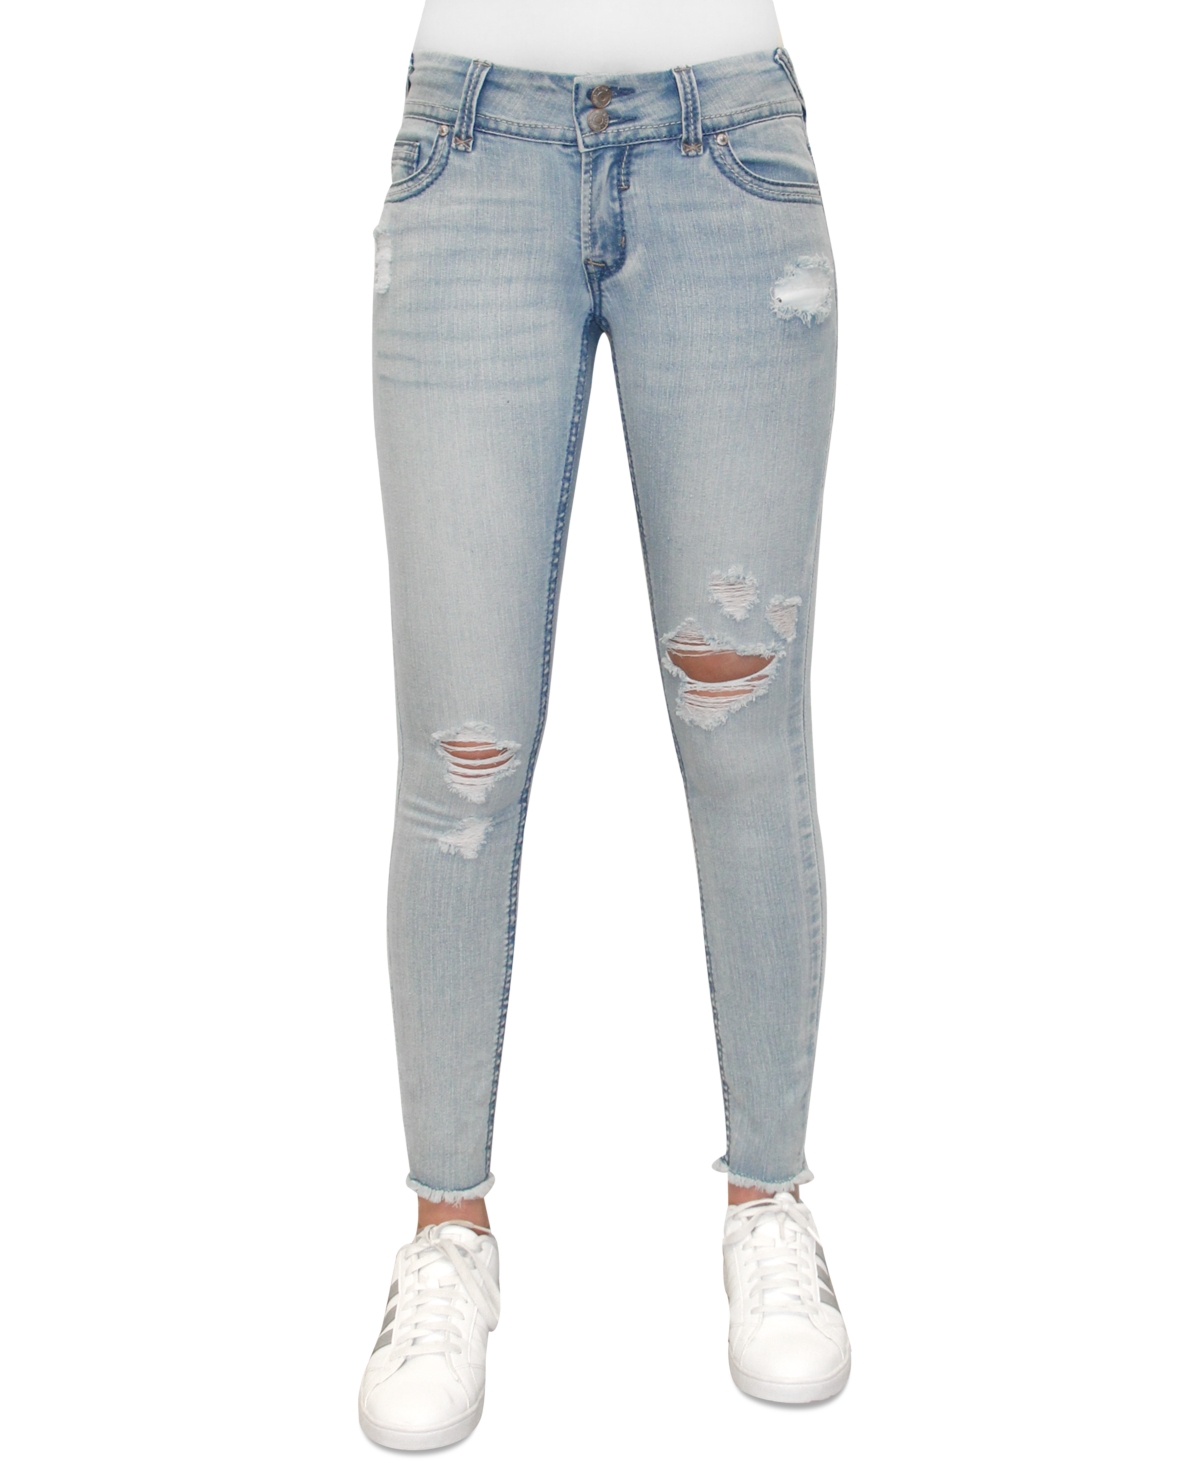 Juniors' Ripped Double-Button Jeans - Light Wash